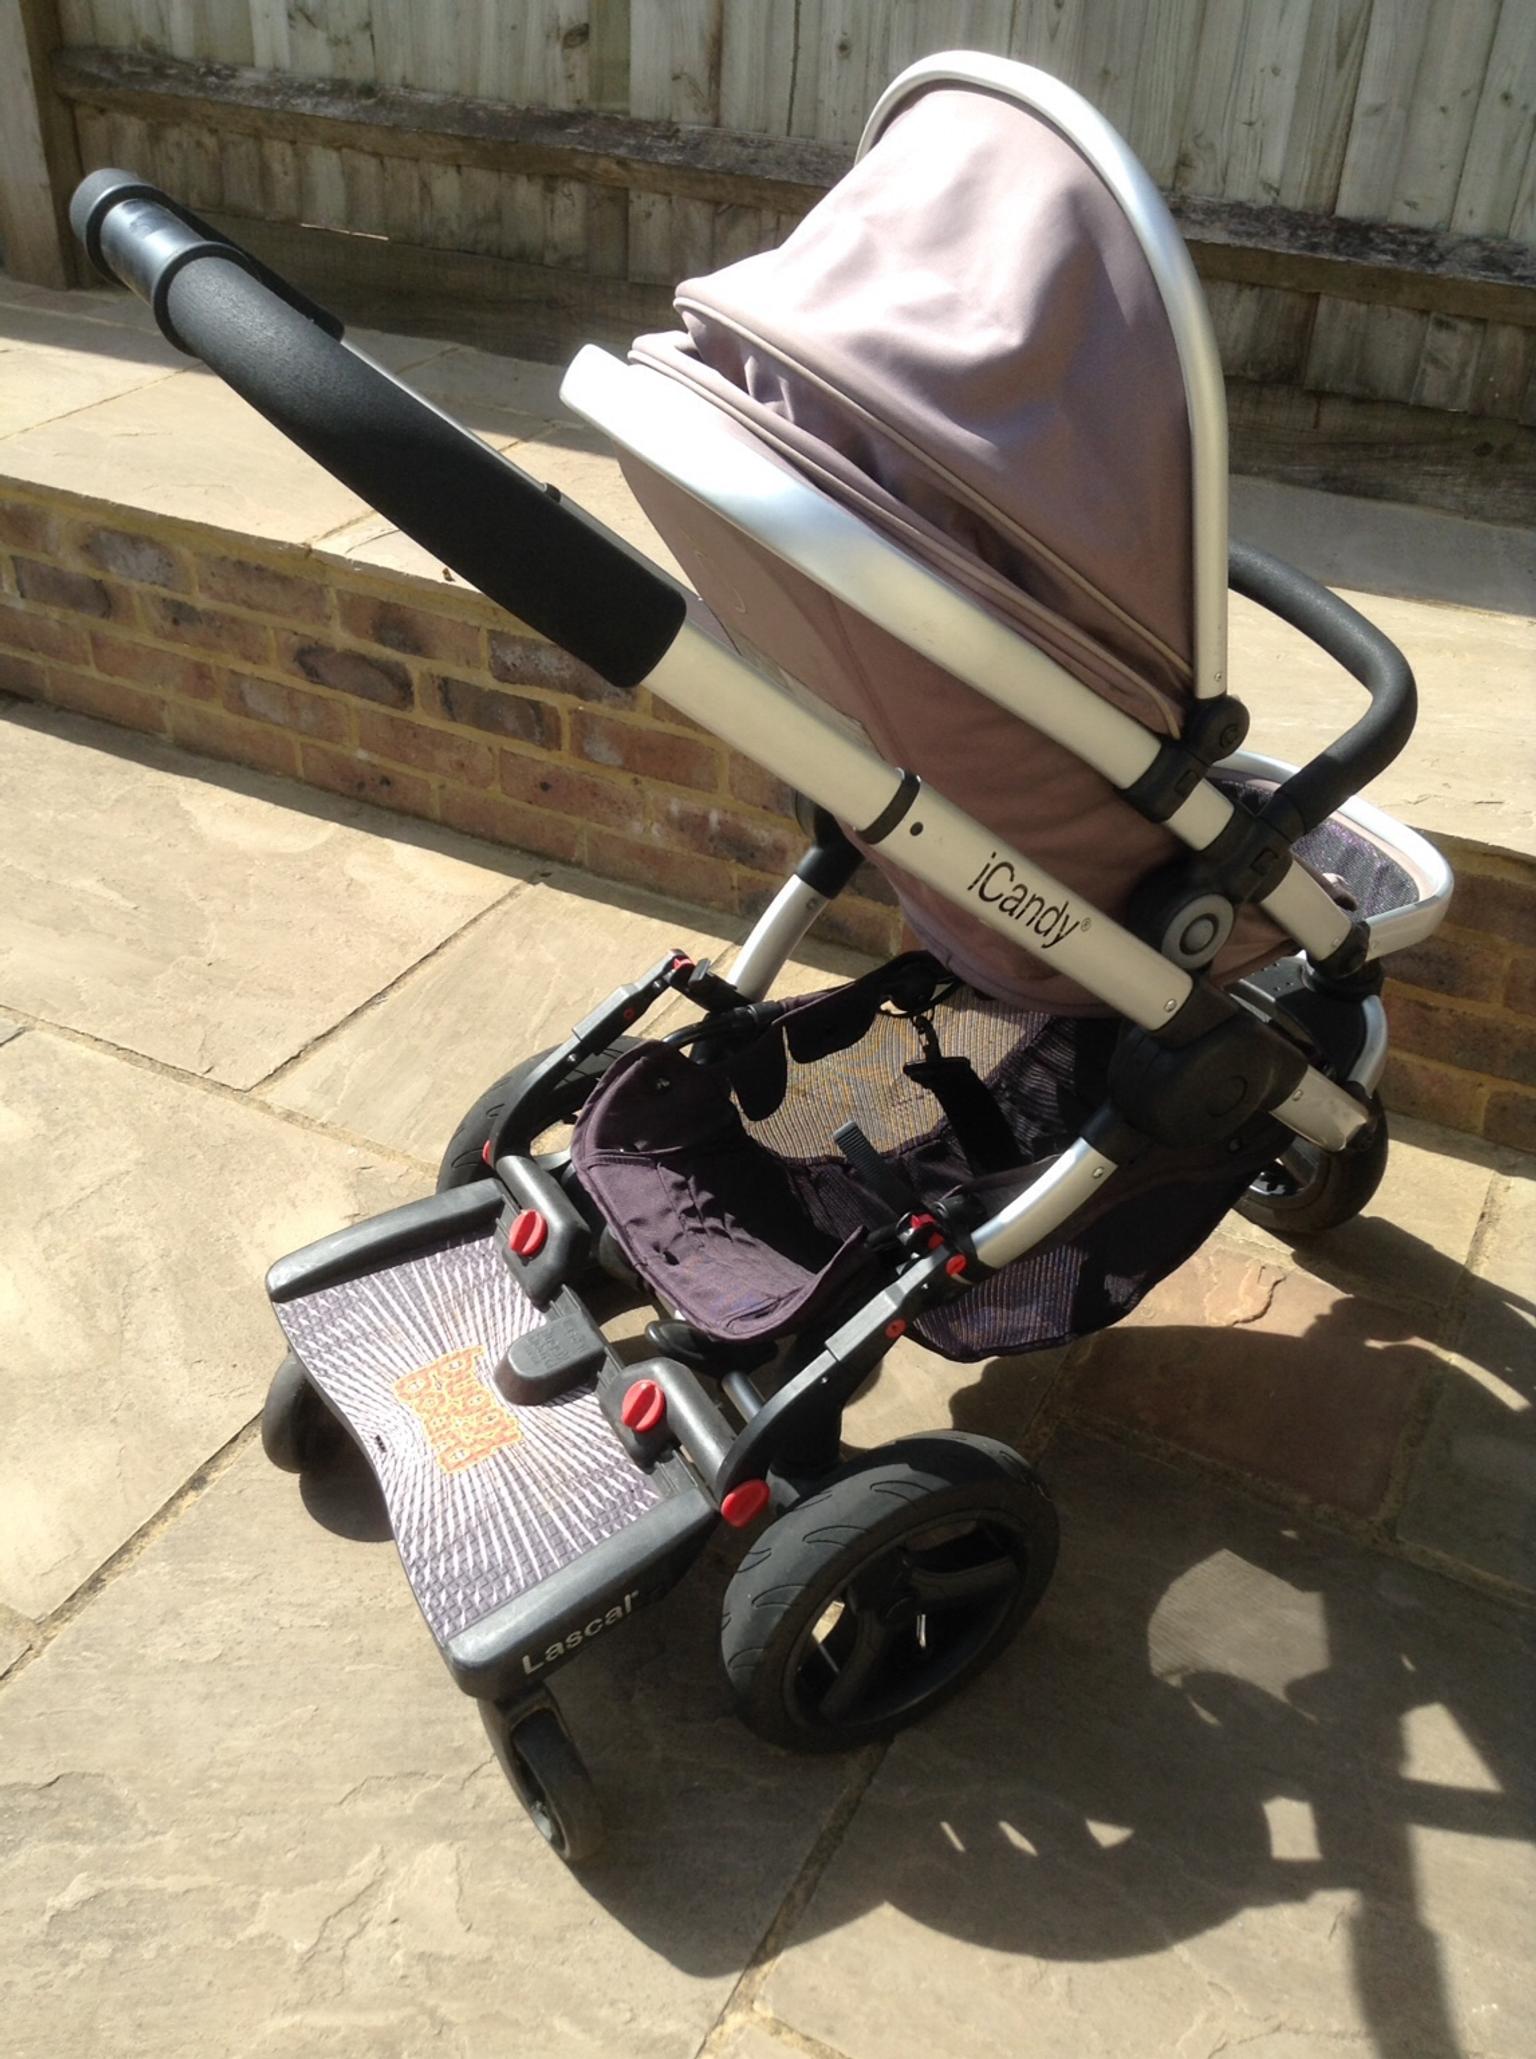 buggy board for icandy peach jogger